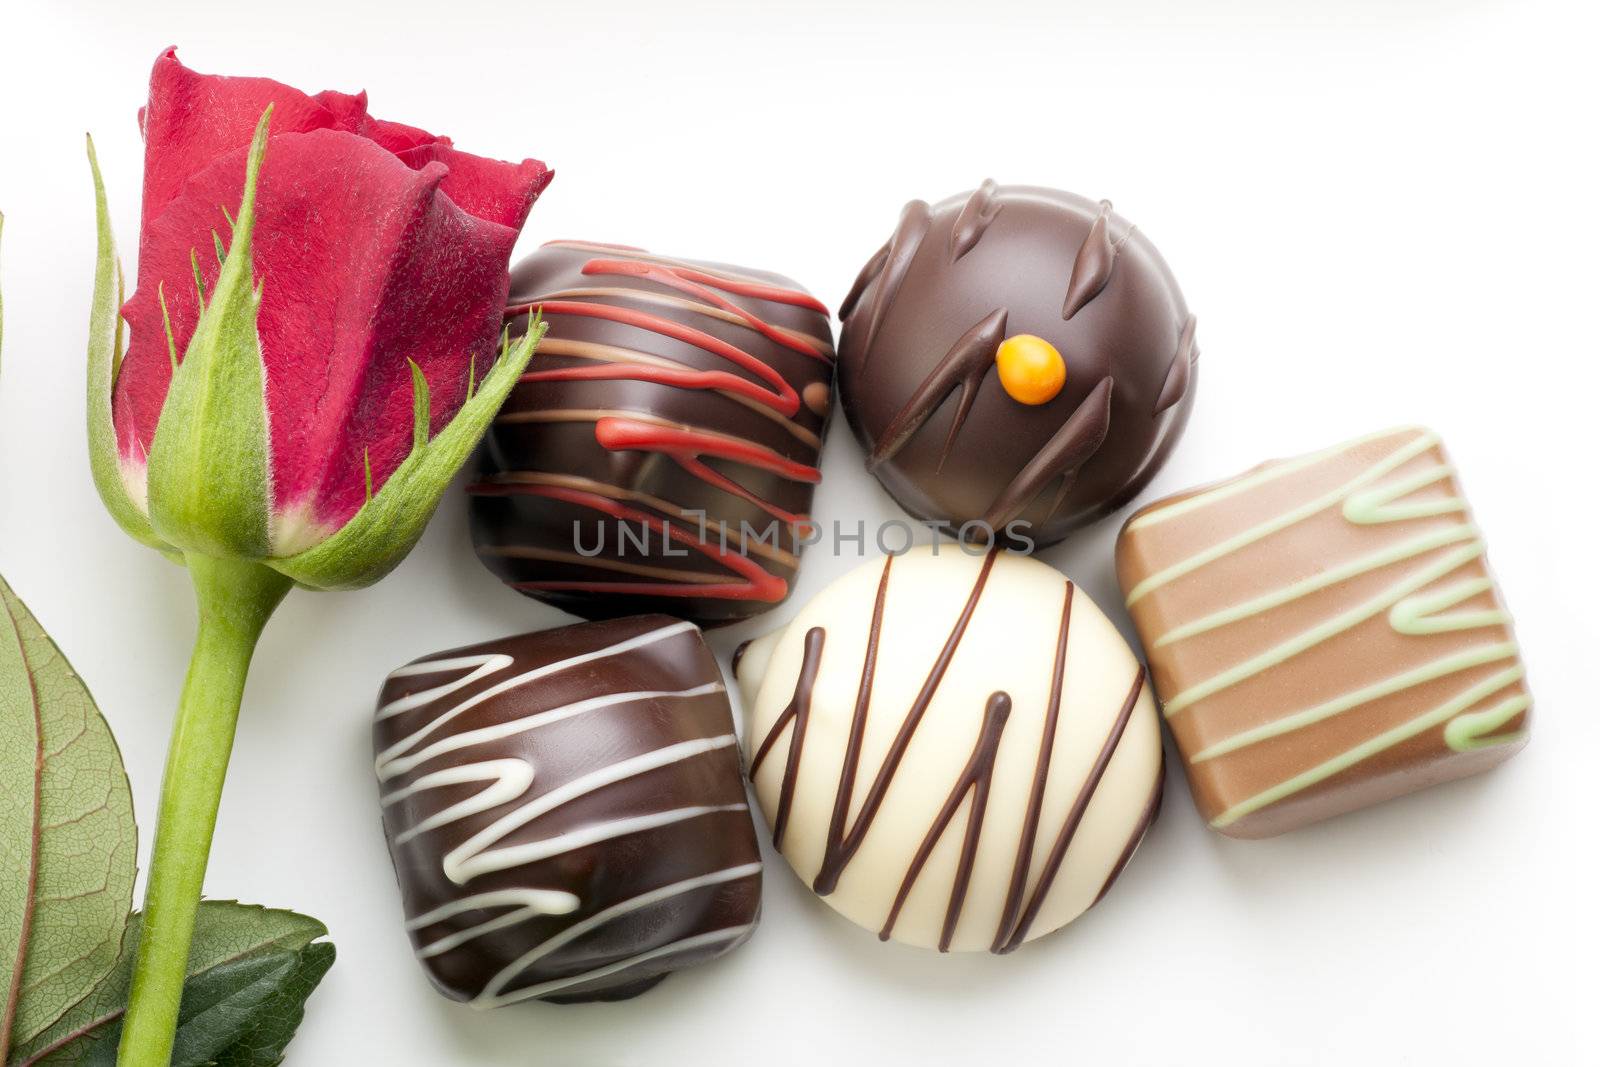 A little romance with a red rose and chocolate bon-bons.